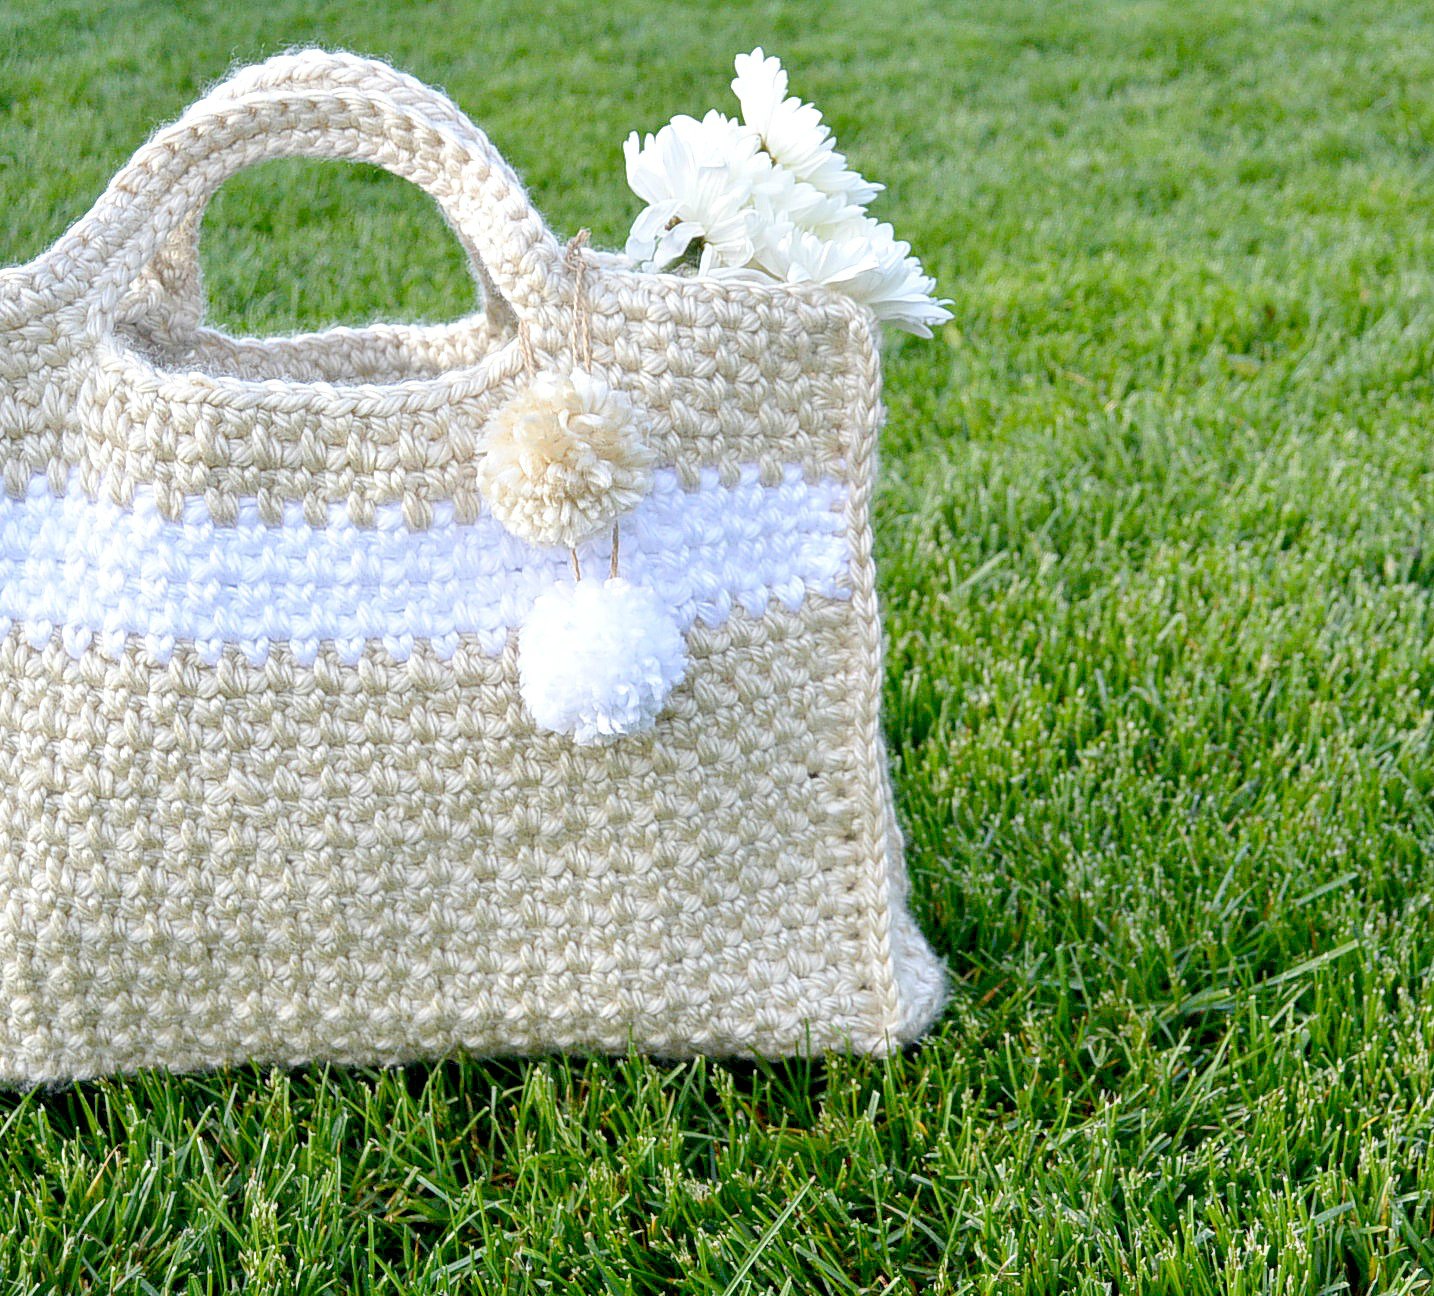 How To Make Crochet Bag Step By Step